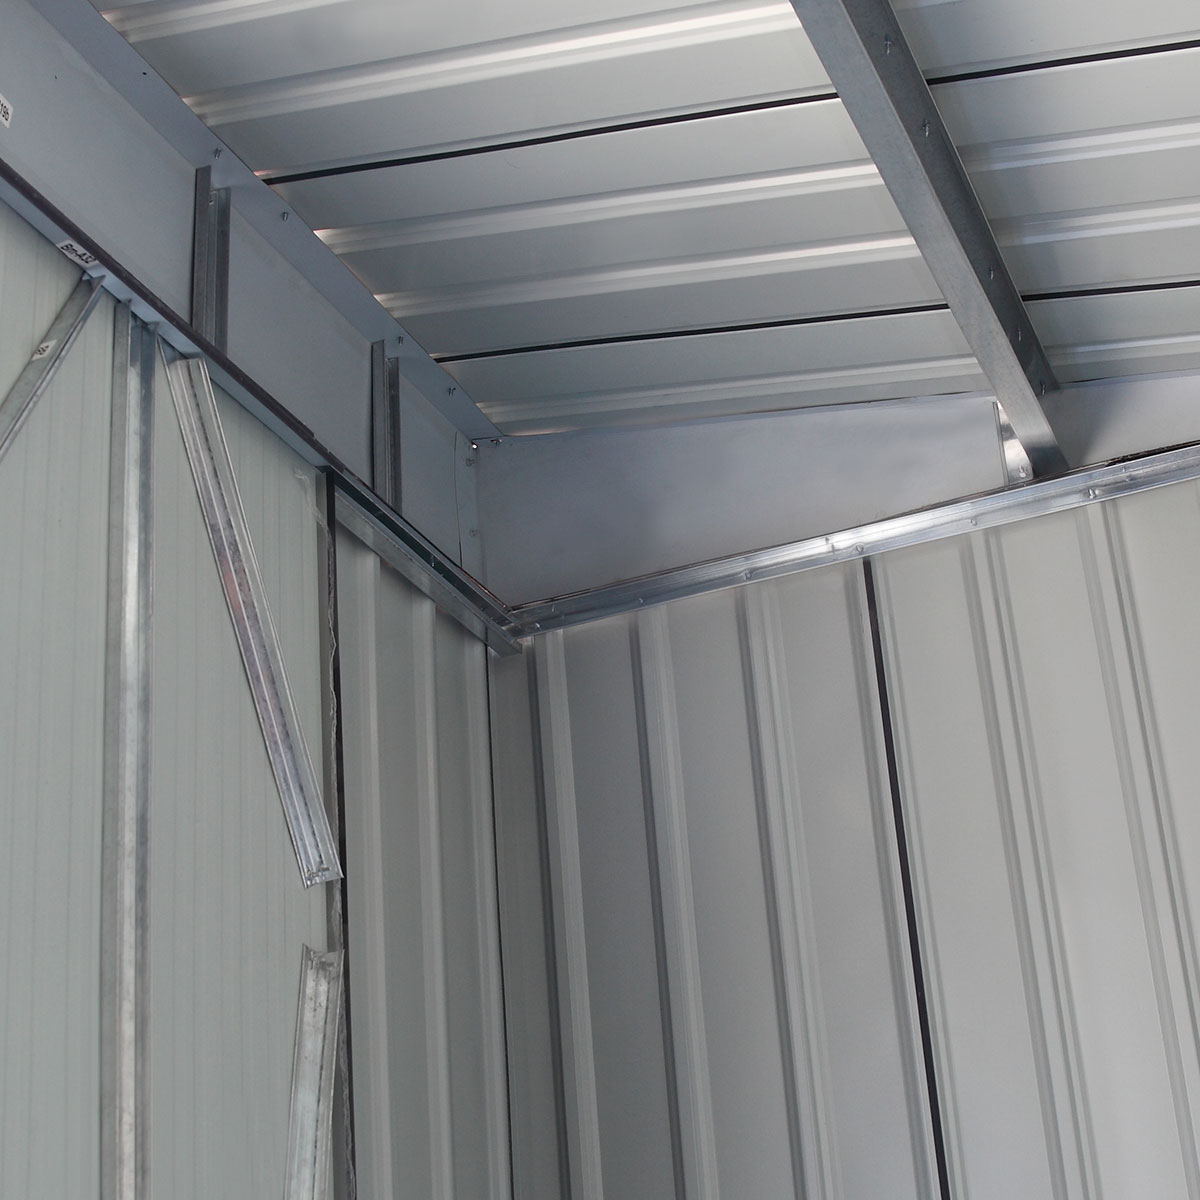 Jaxpety x 9-ft 9 x 4 Ft Garden Storage Shed Galvanized Steel Storage Shed the Metal Storage Sheds department at Lowes.com